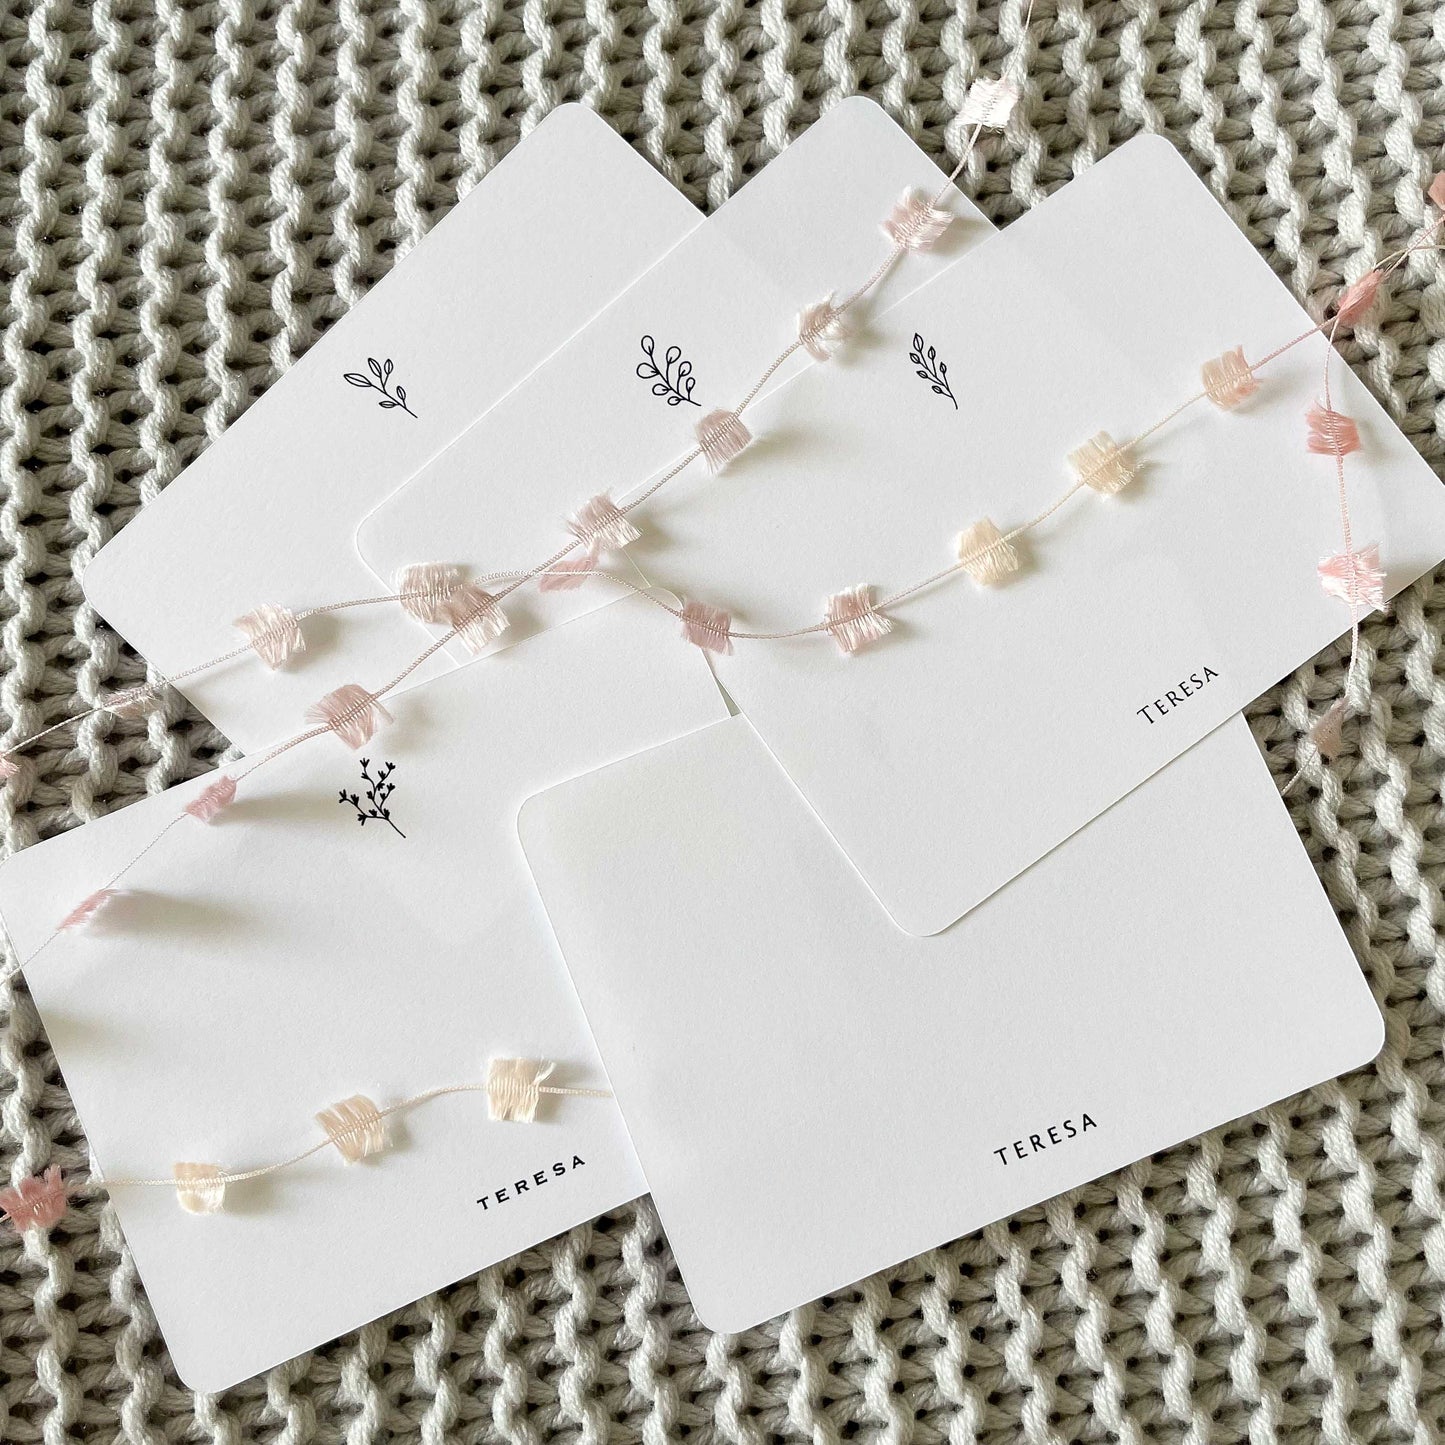 Teresa Personalized Gift Cards